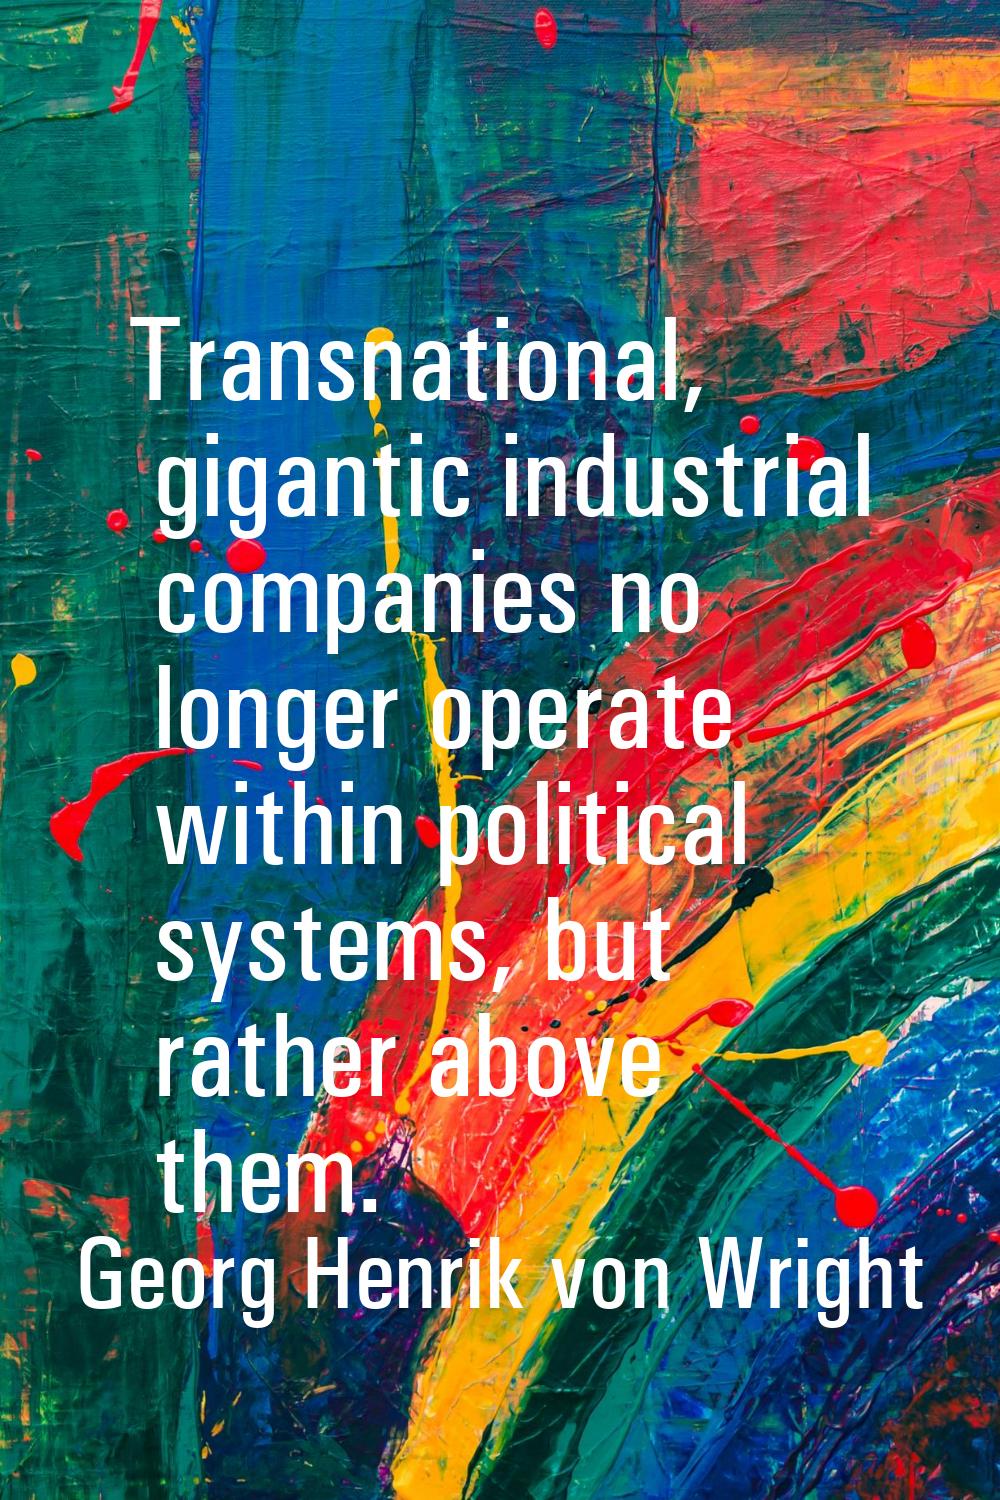 Transnational, gigantic industrial companies no longer operate within political systems, but rather